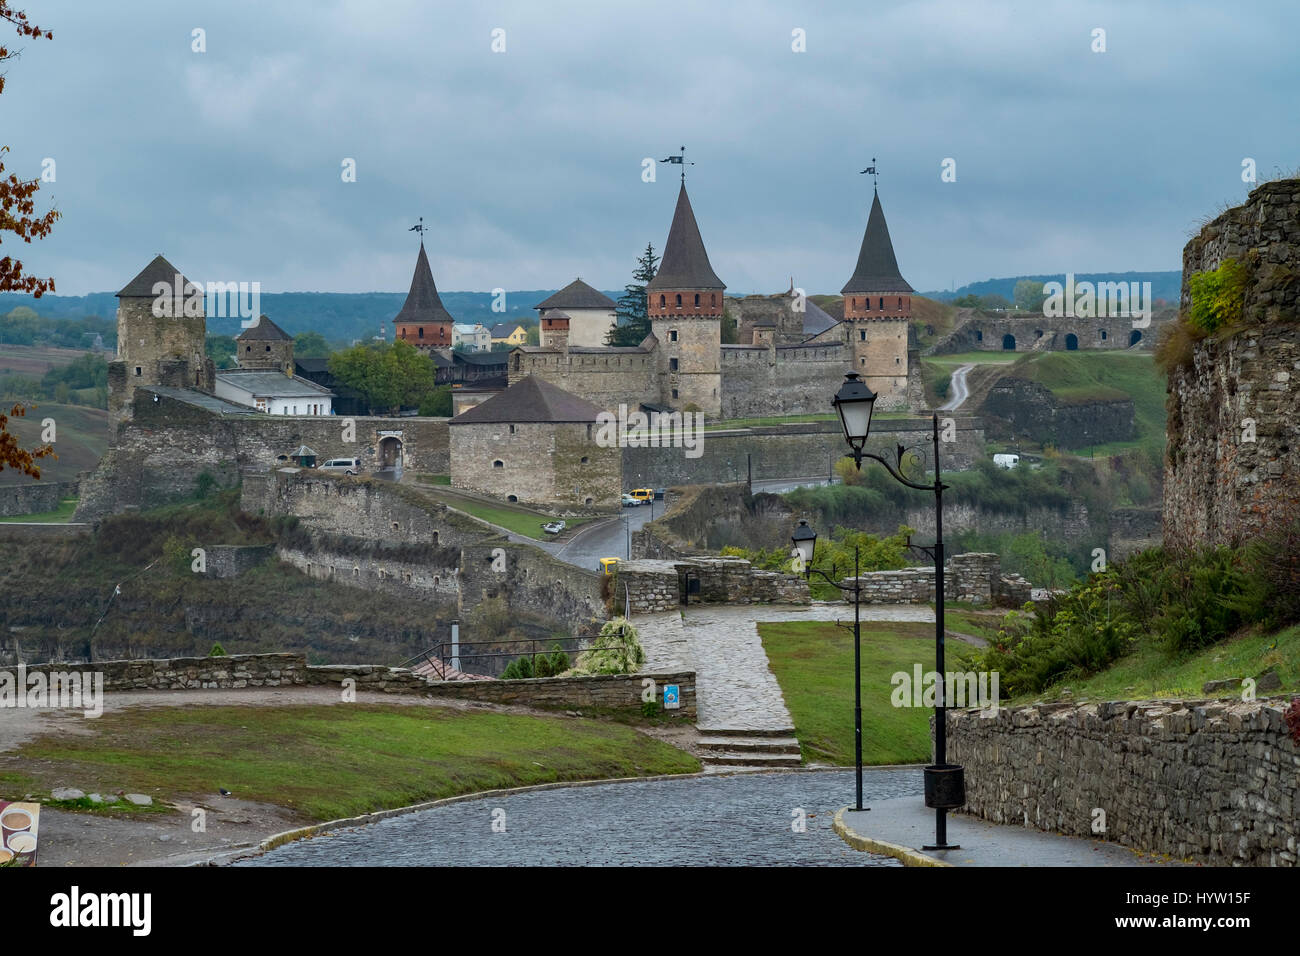 View of the Most Zamkowy and Castle of Kamianets-Podilskyi in Western Ukraine taken on a rainy autumn day. The cobbled street leads the eye across the Stock Photo